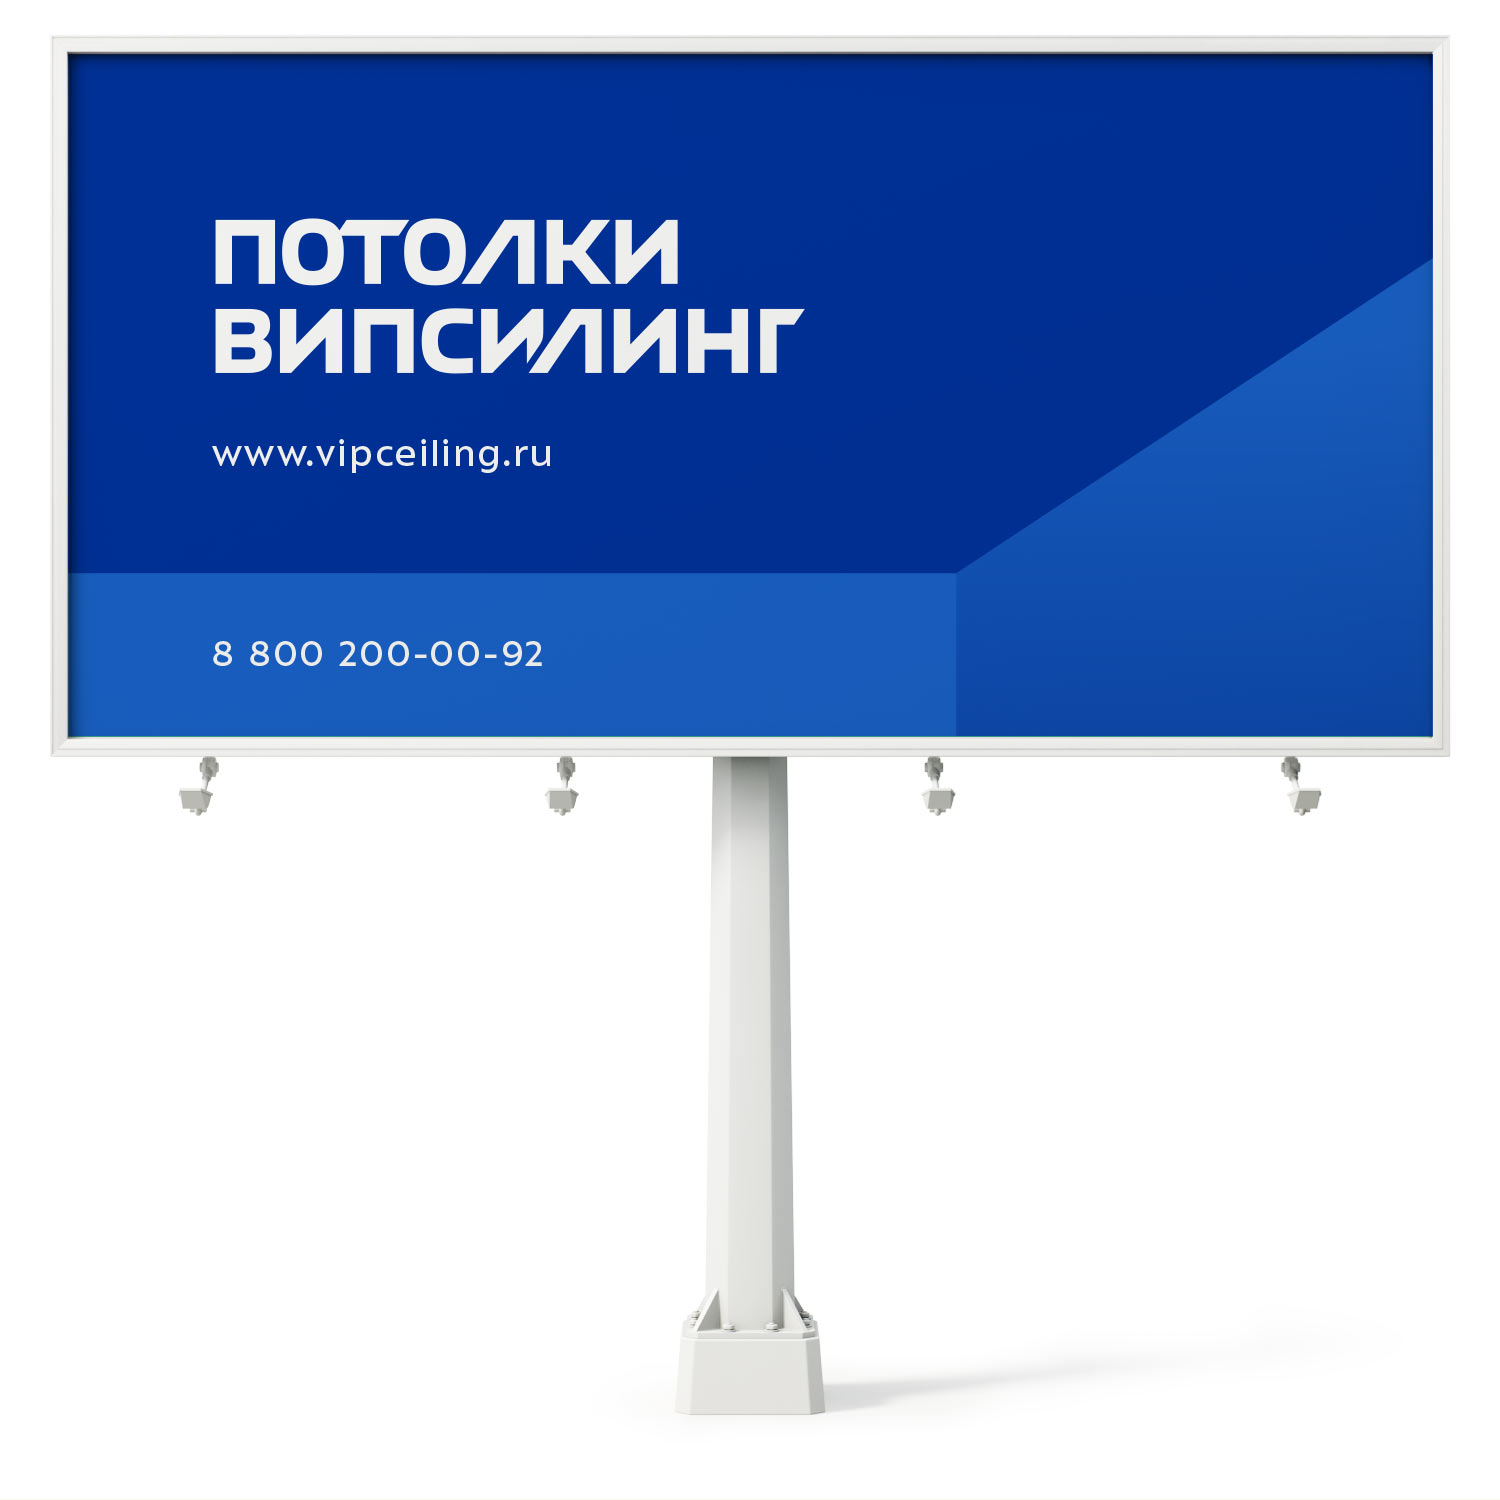 vipceiling board